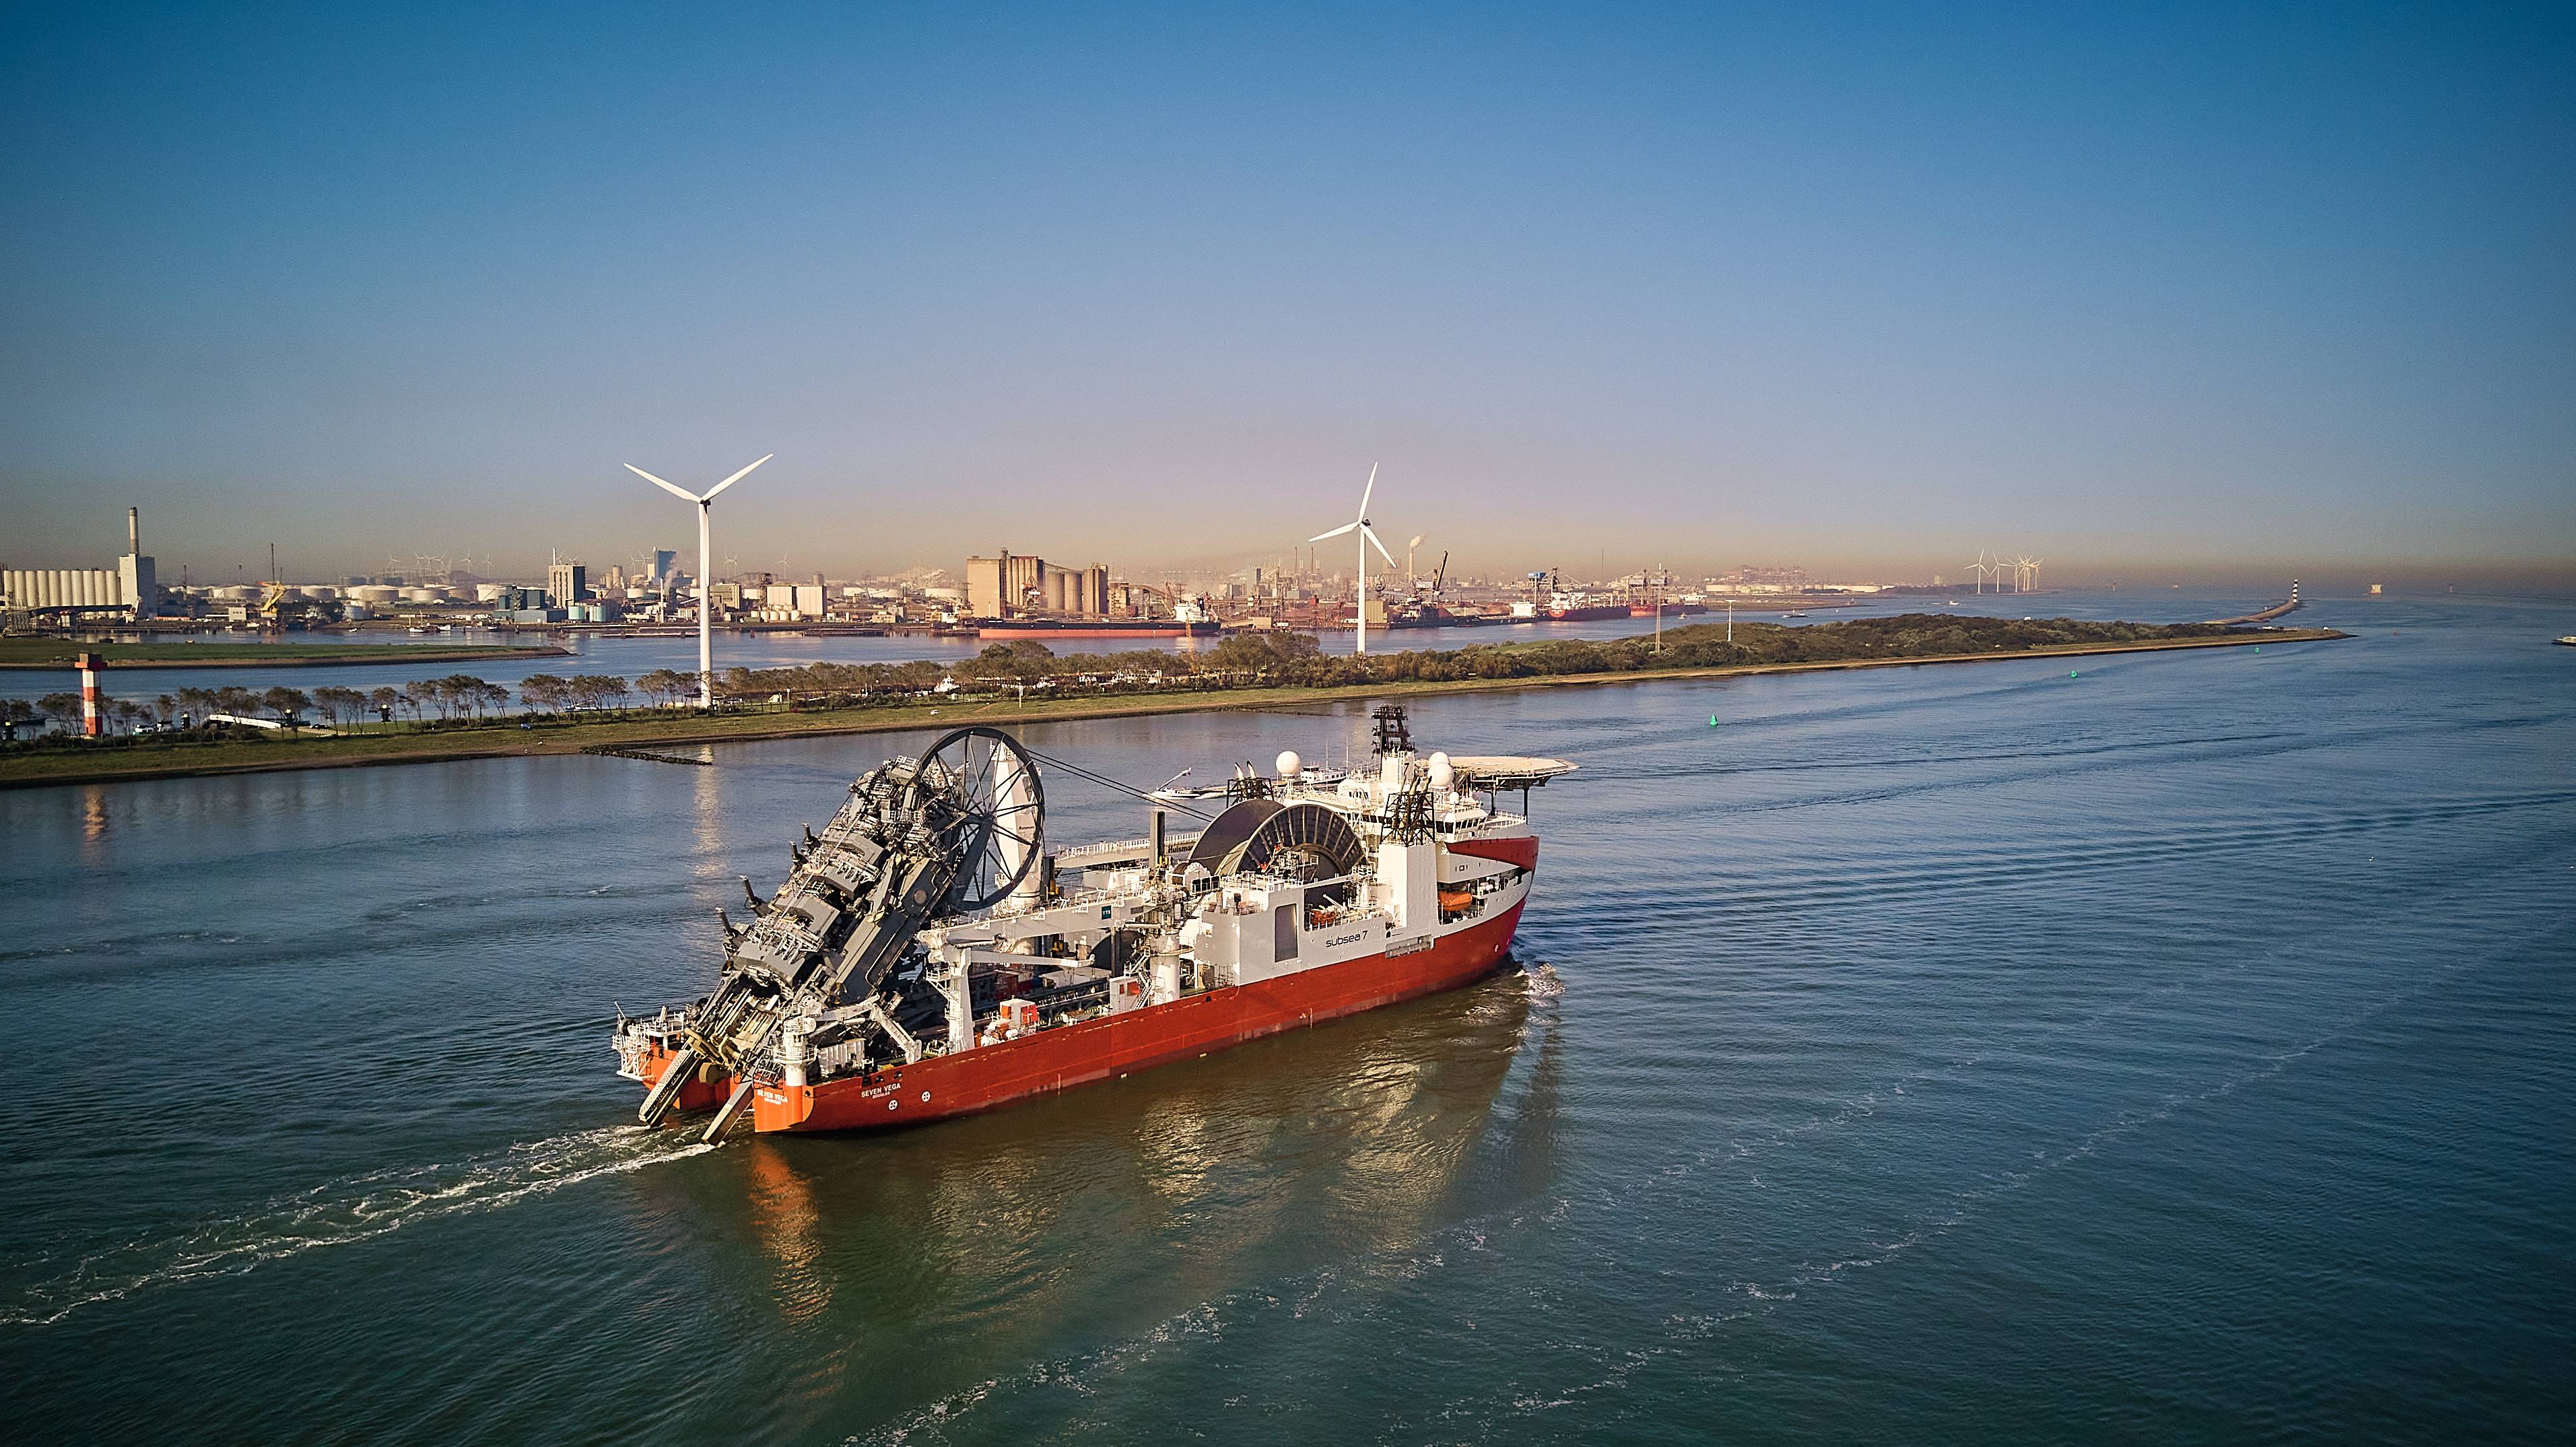 VIDEO: Subsea 7 Expands Fleet With Newbuild Reel-Lay